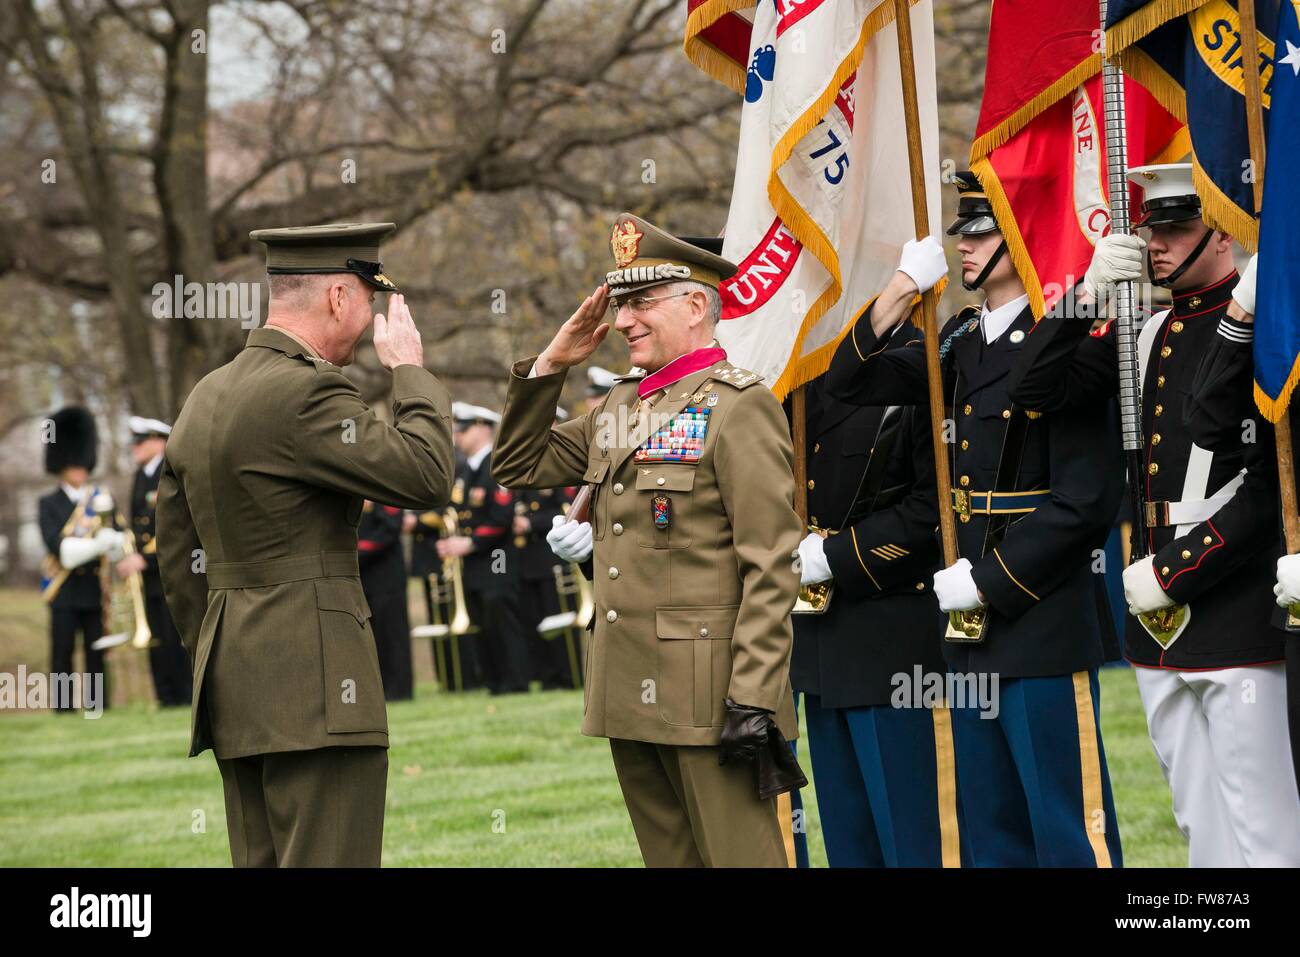 U.S Joint Chiefs Chairman General Joseph F. Dunford Jr. presents the Legion of Merit to Chief of Defense for Italian Armed Forces General Claudio Graziano during a full honors ceremony at Whipple Field on Joint Base Myer-Henderson Hall March 31, 2016 in Arlington, Virginia. Stock Photo